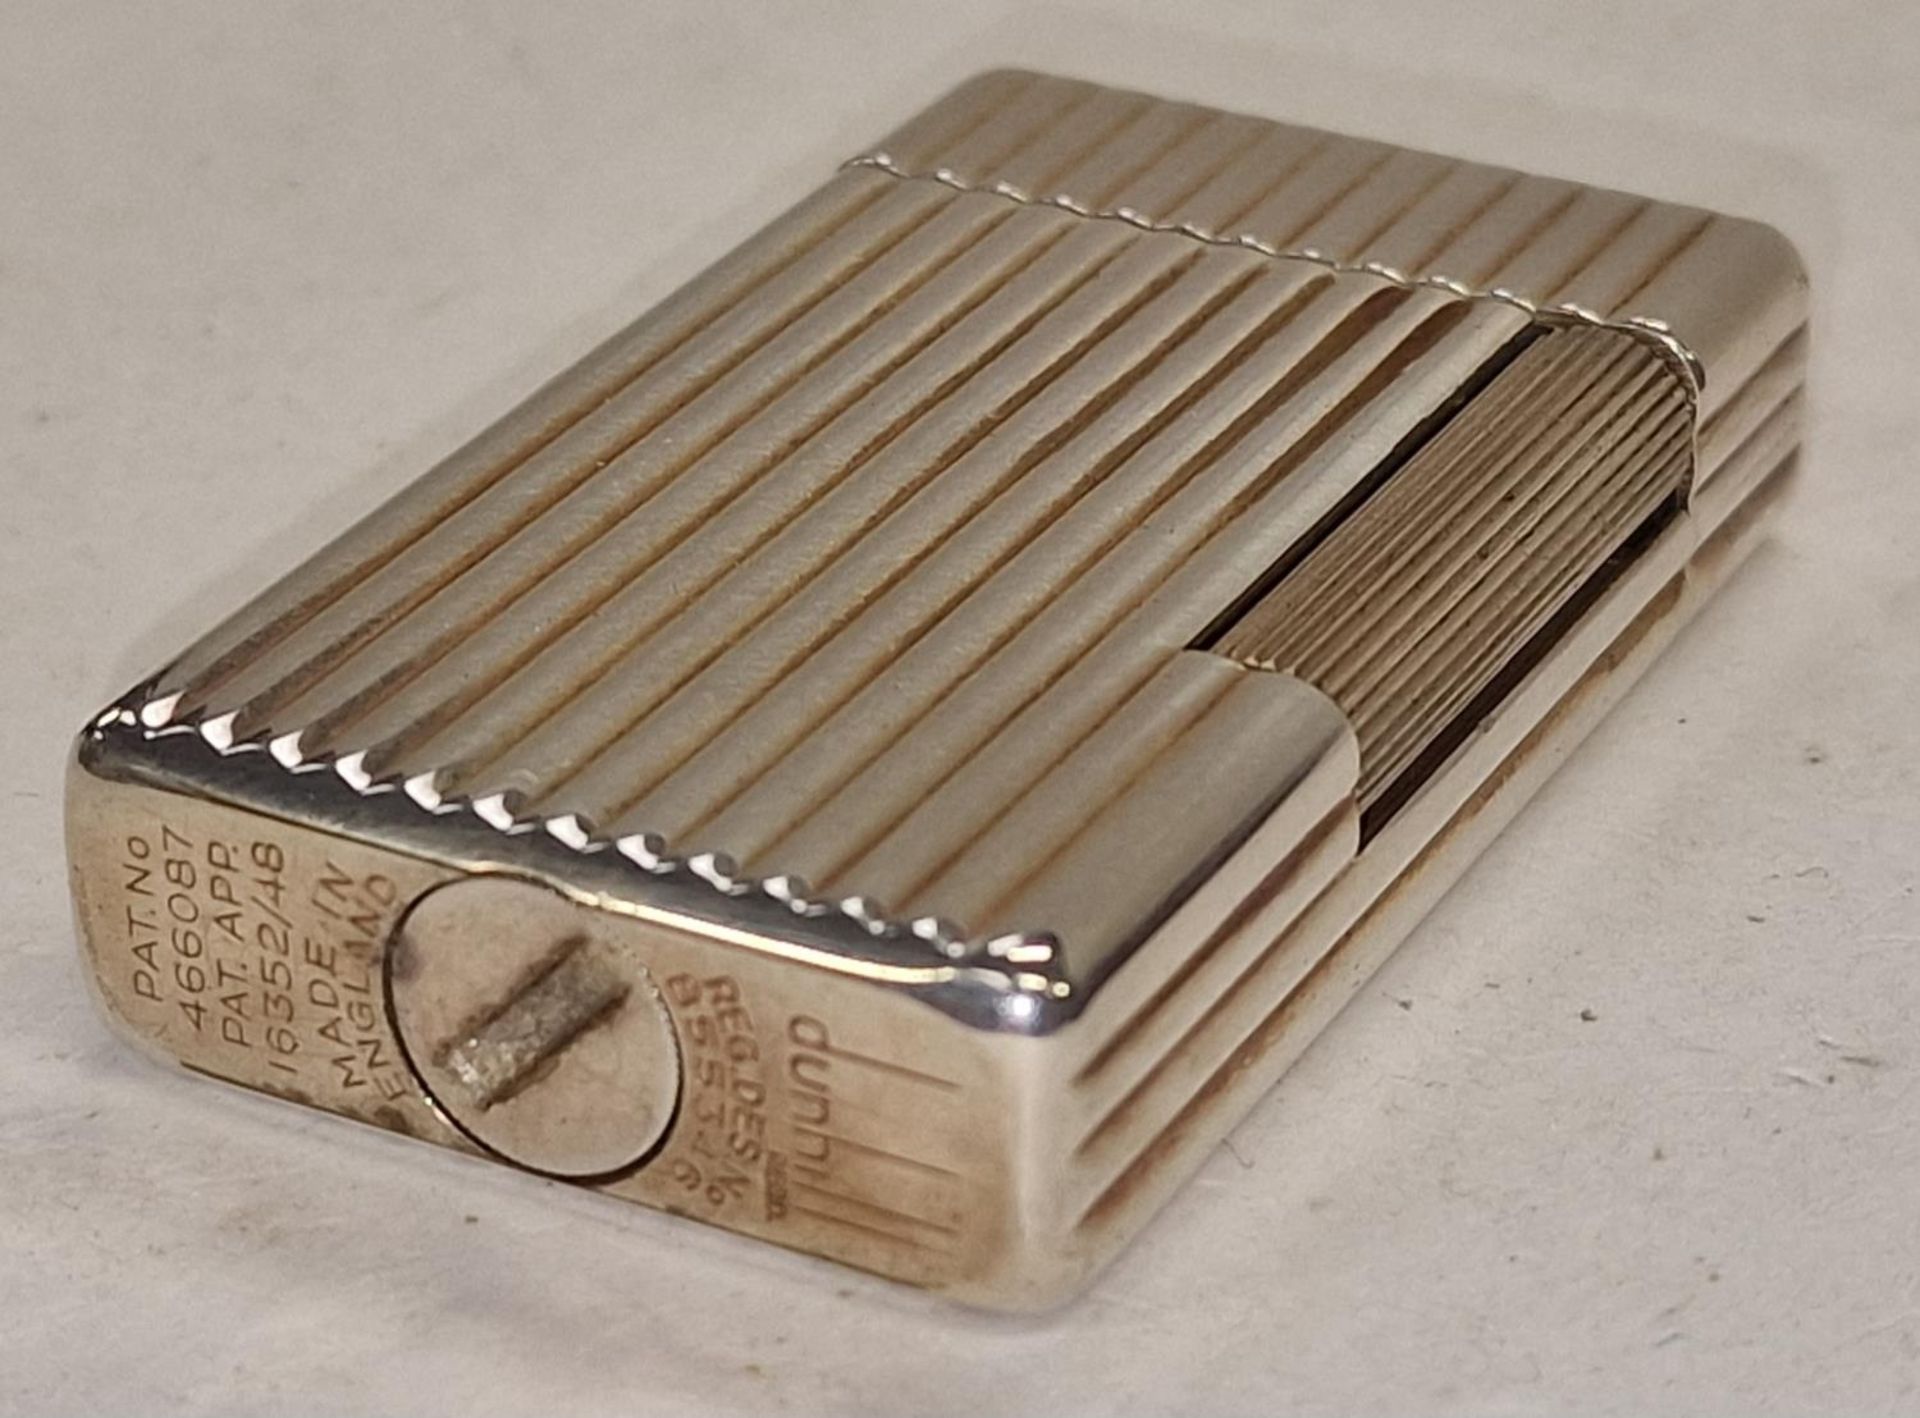 Dunhill "Rollalite" vintage 1960's lighter c/w original outer box, fabric slip case and - Image 2 of 4